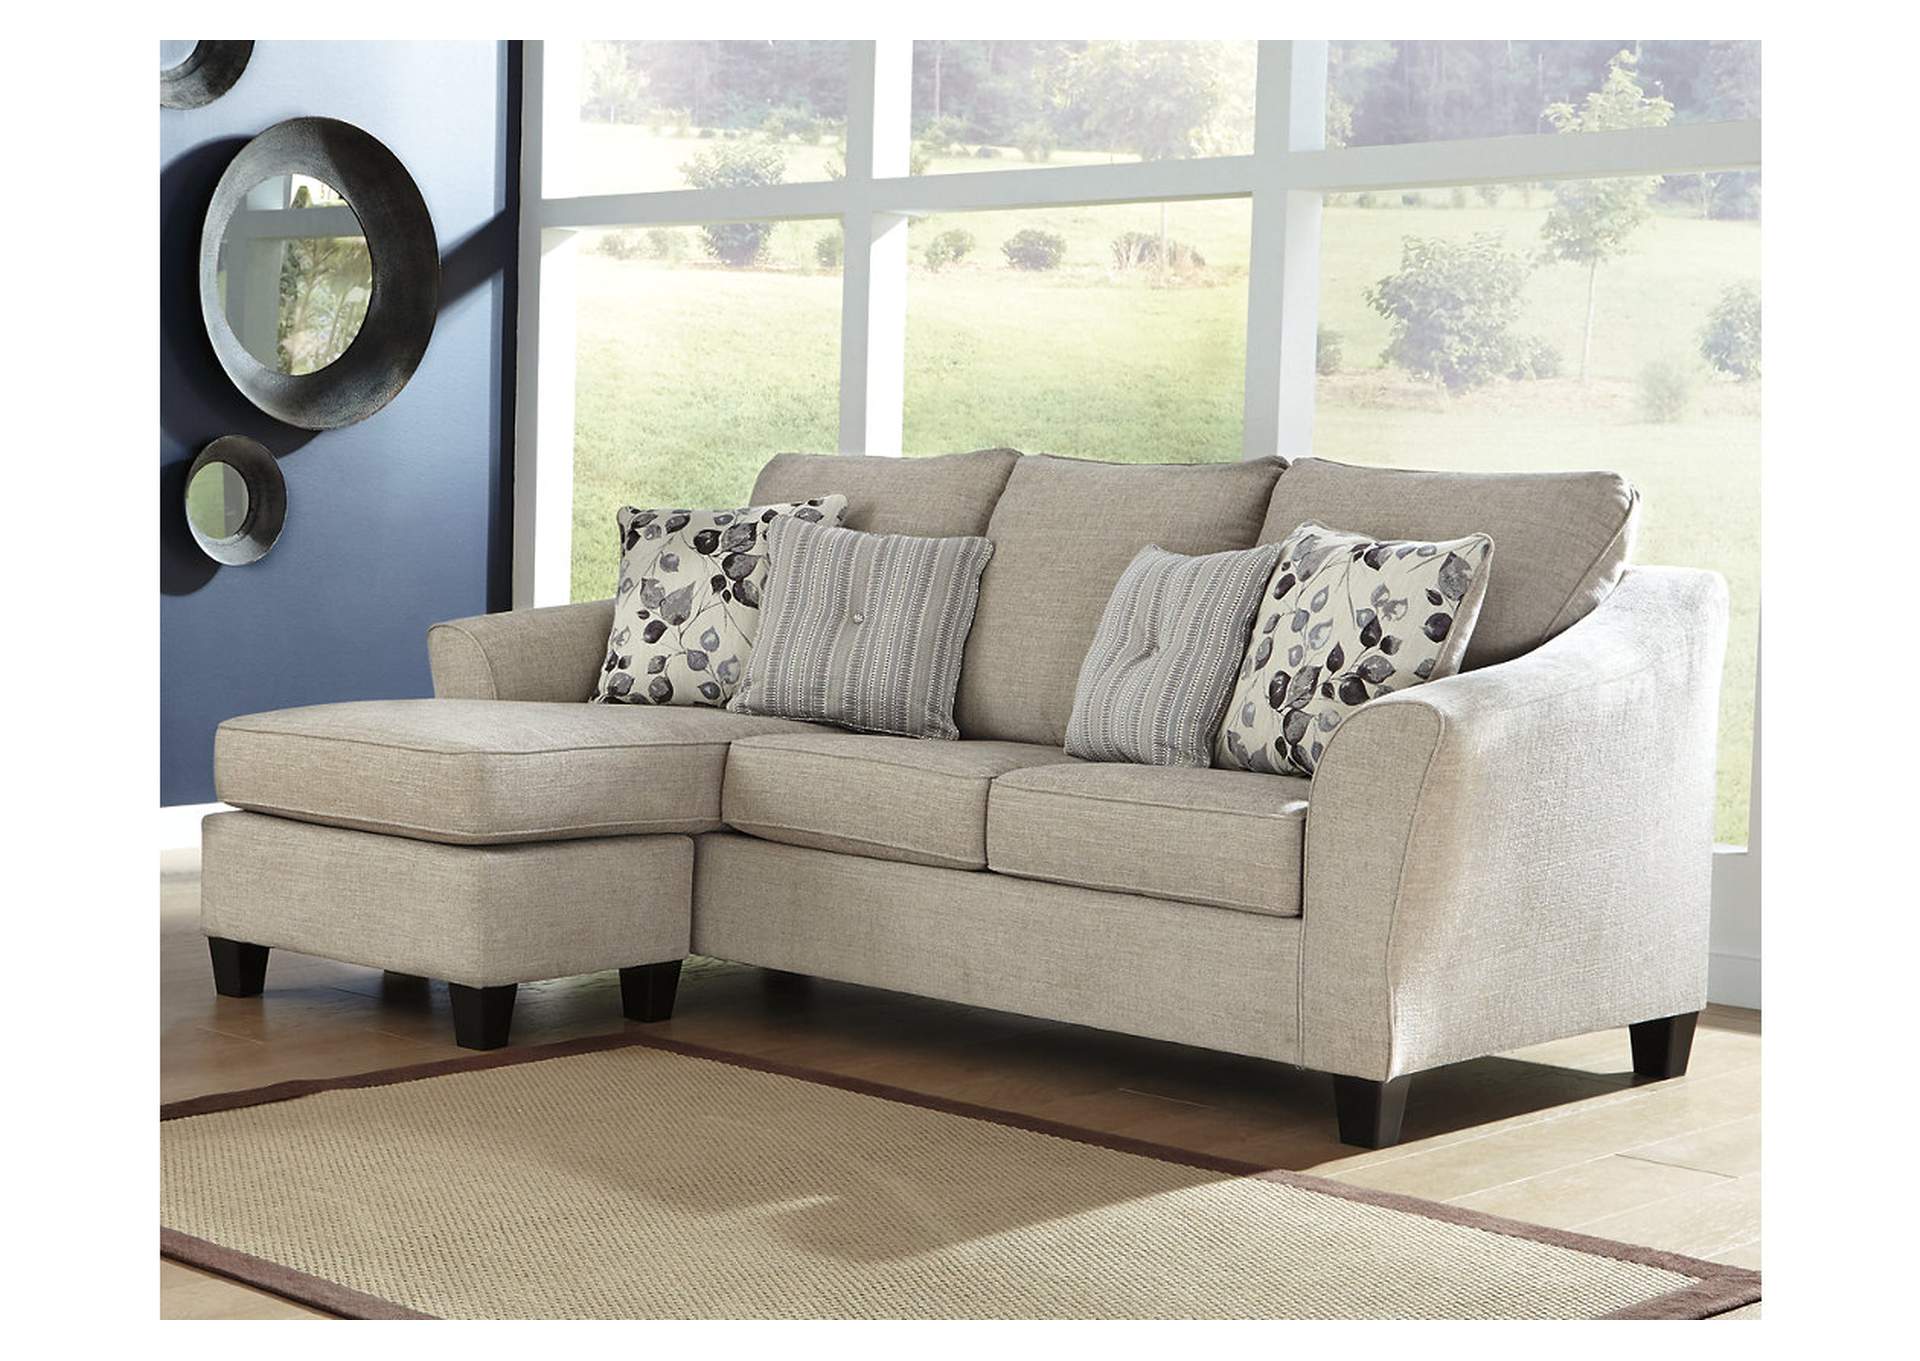 Abney Sofa Chaise and Chair,Benchcraft